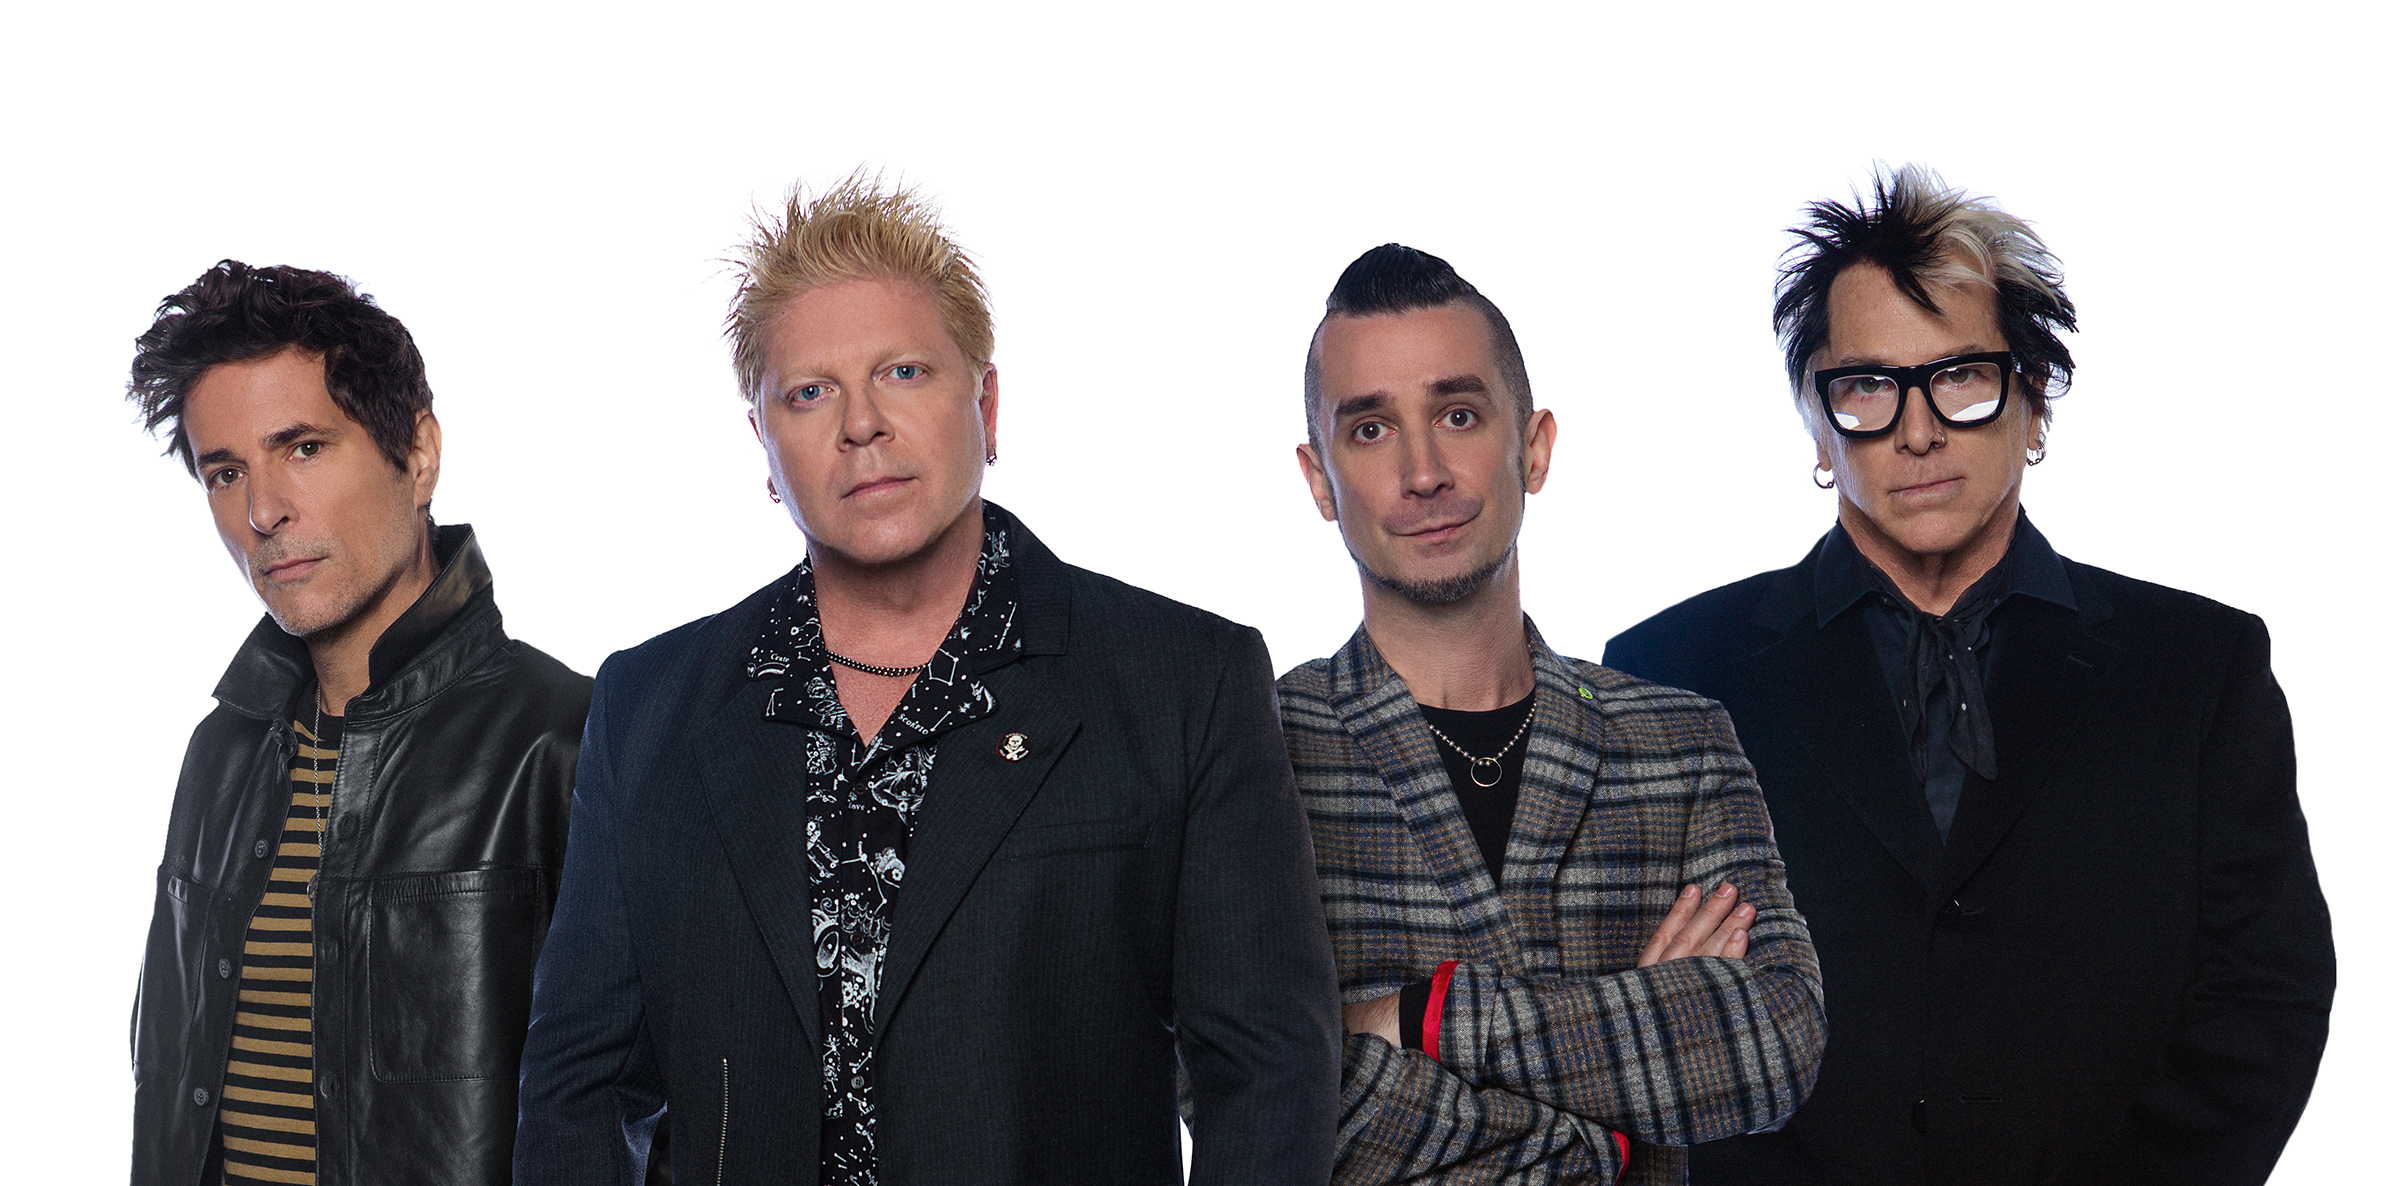 THE OFFSPRING release new single 'Let The Bad Times Roll', and announce brand new album for April 16th 